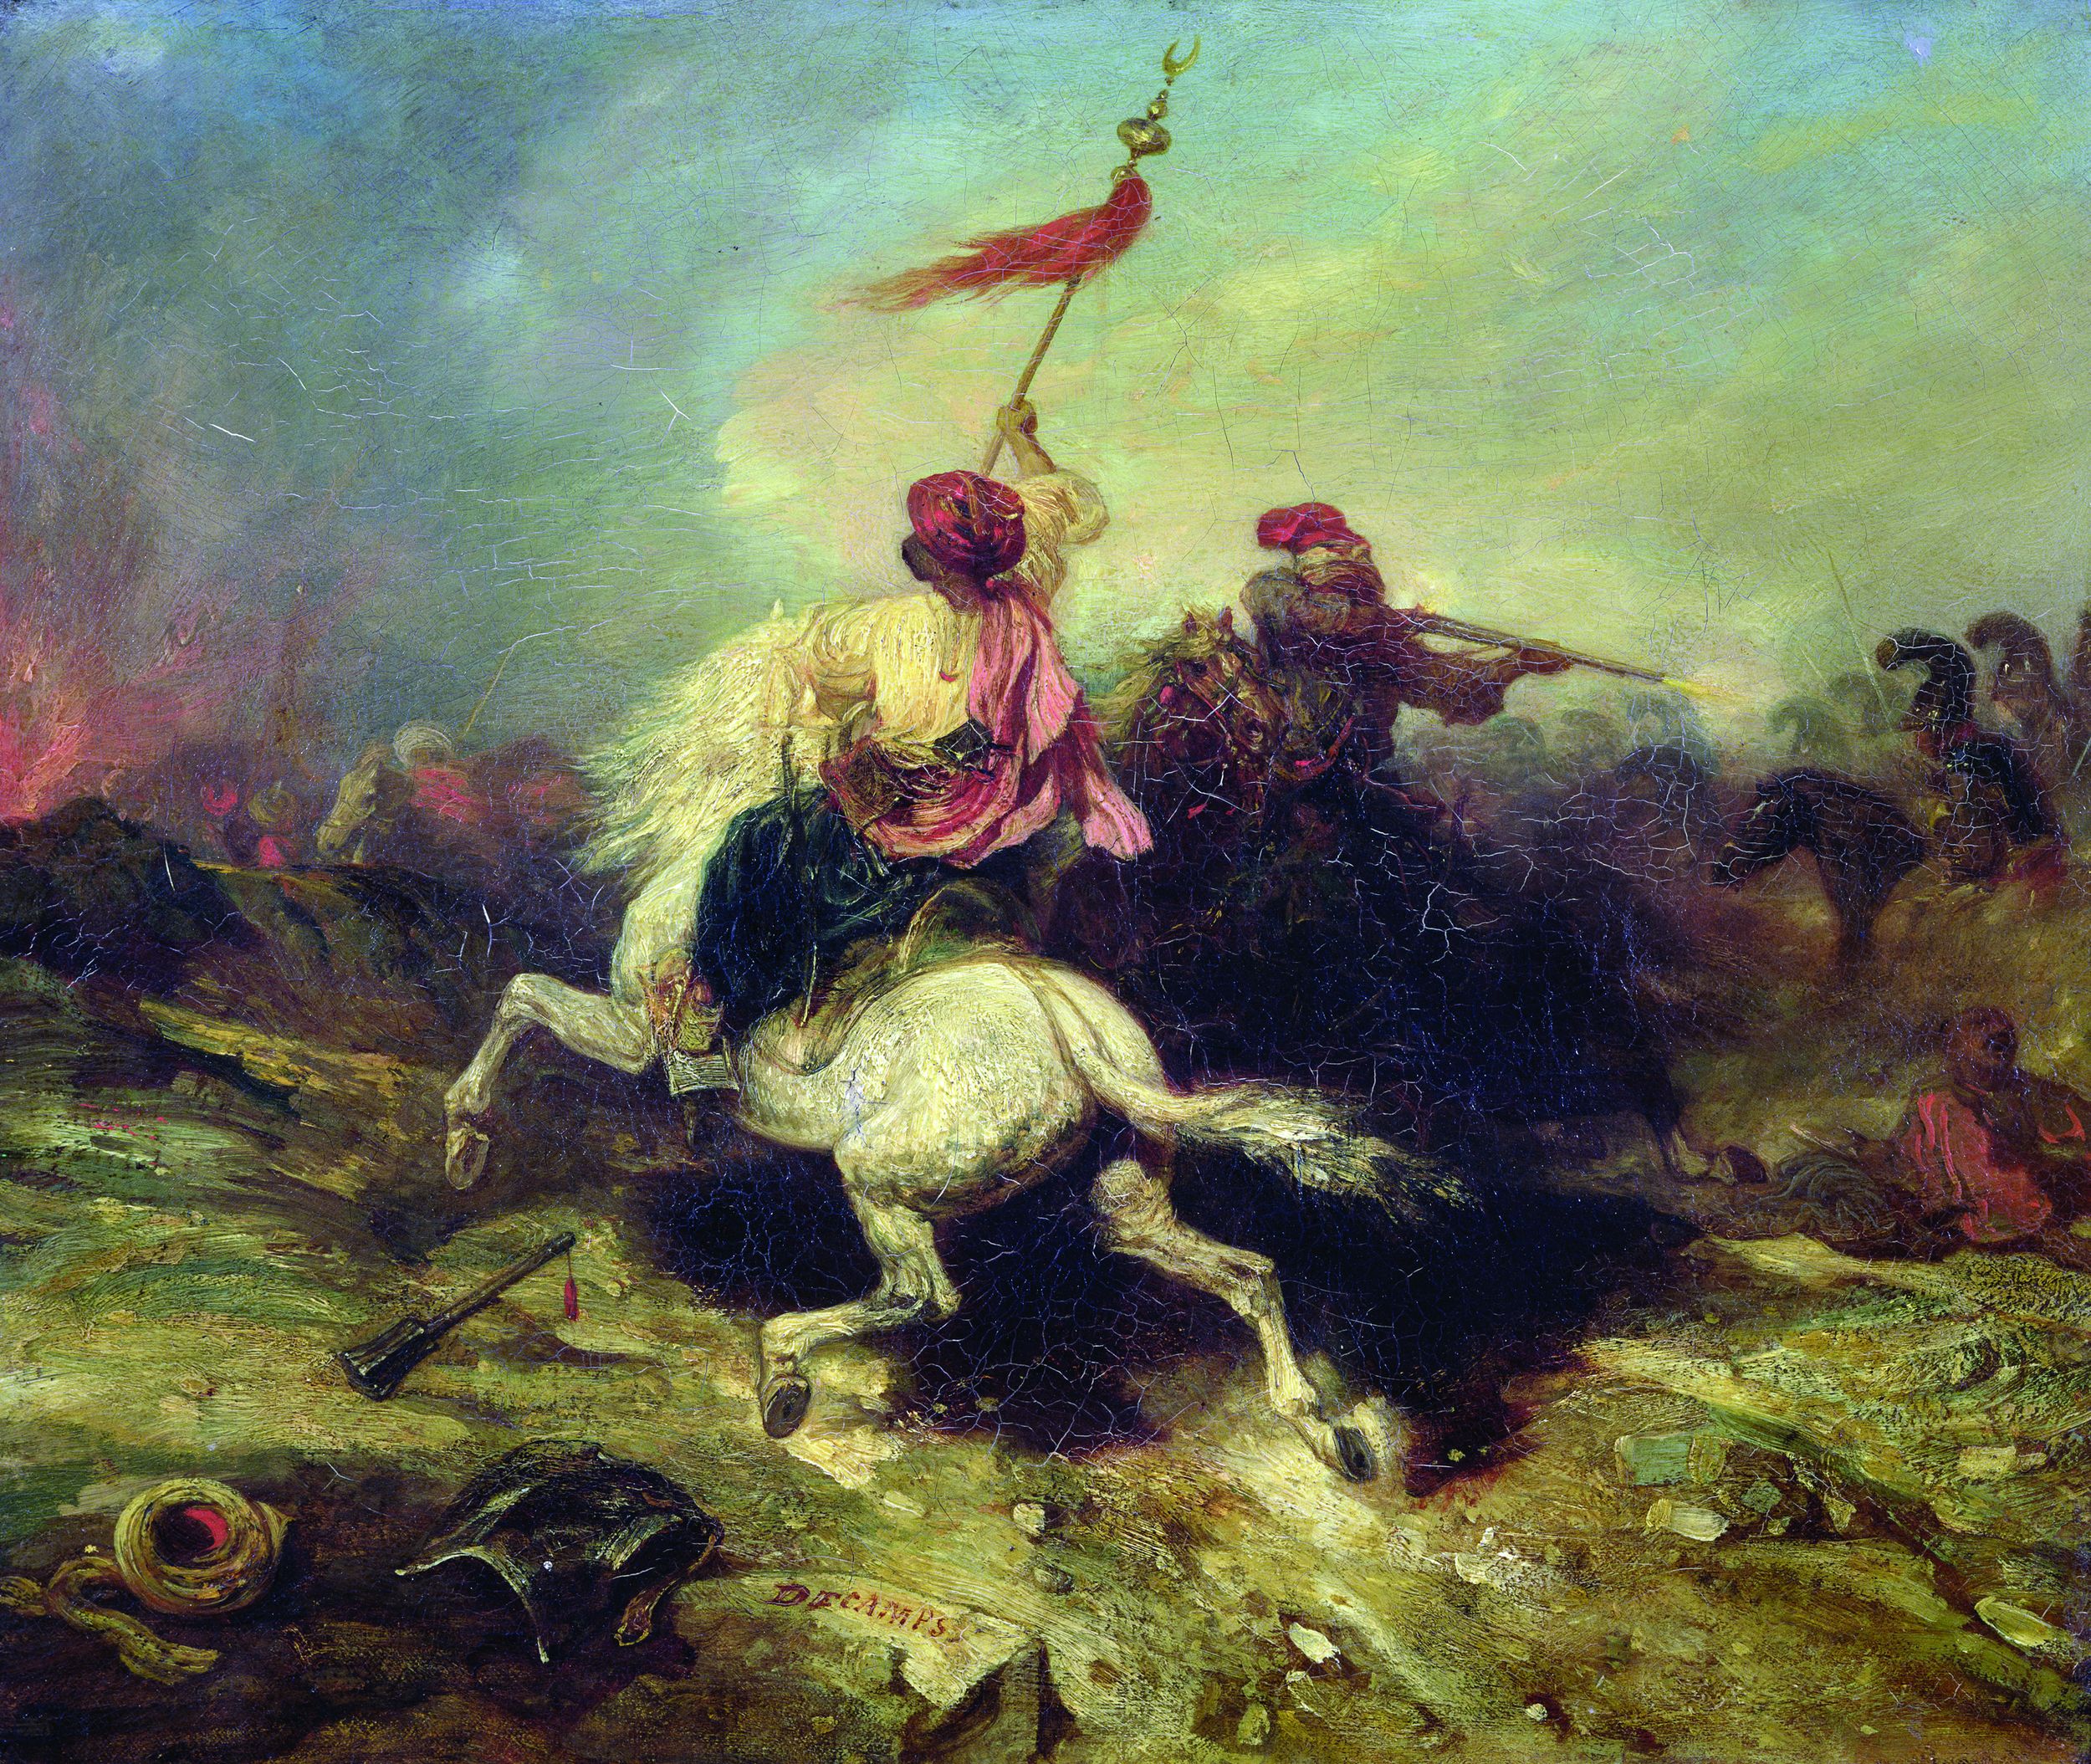 A Turkish standard-bearer rides into battle. It was a sight all too familiar to Russian general Mikhail Kutusov, who lost an eye to a Turkish rifleman.